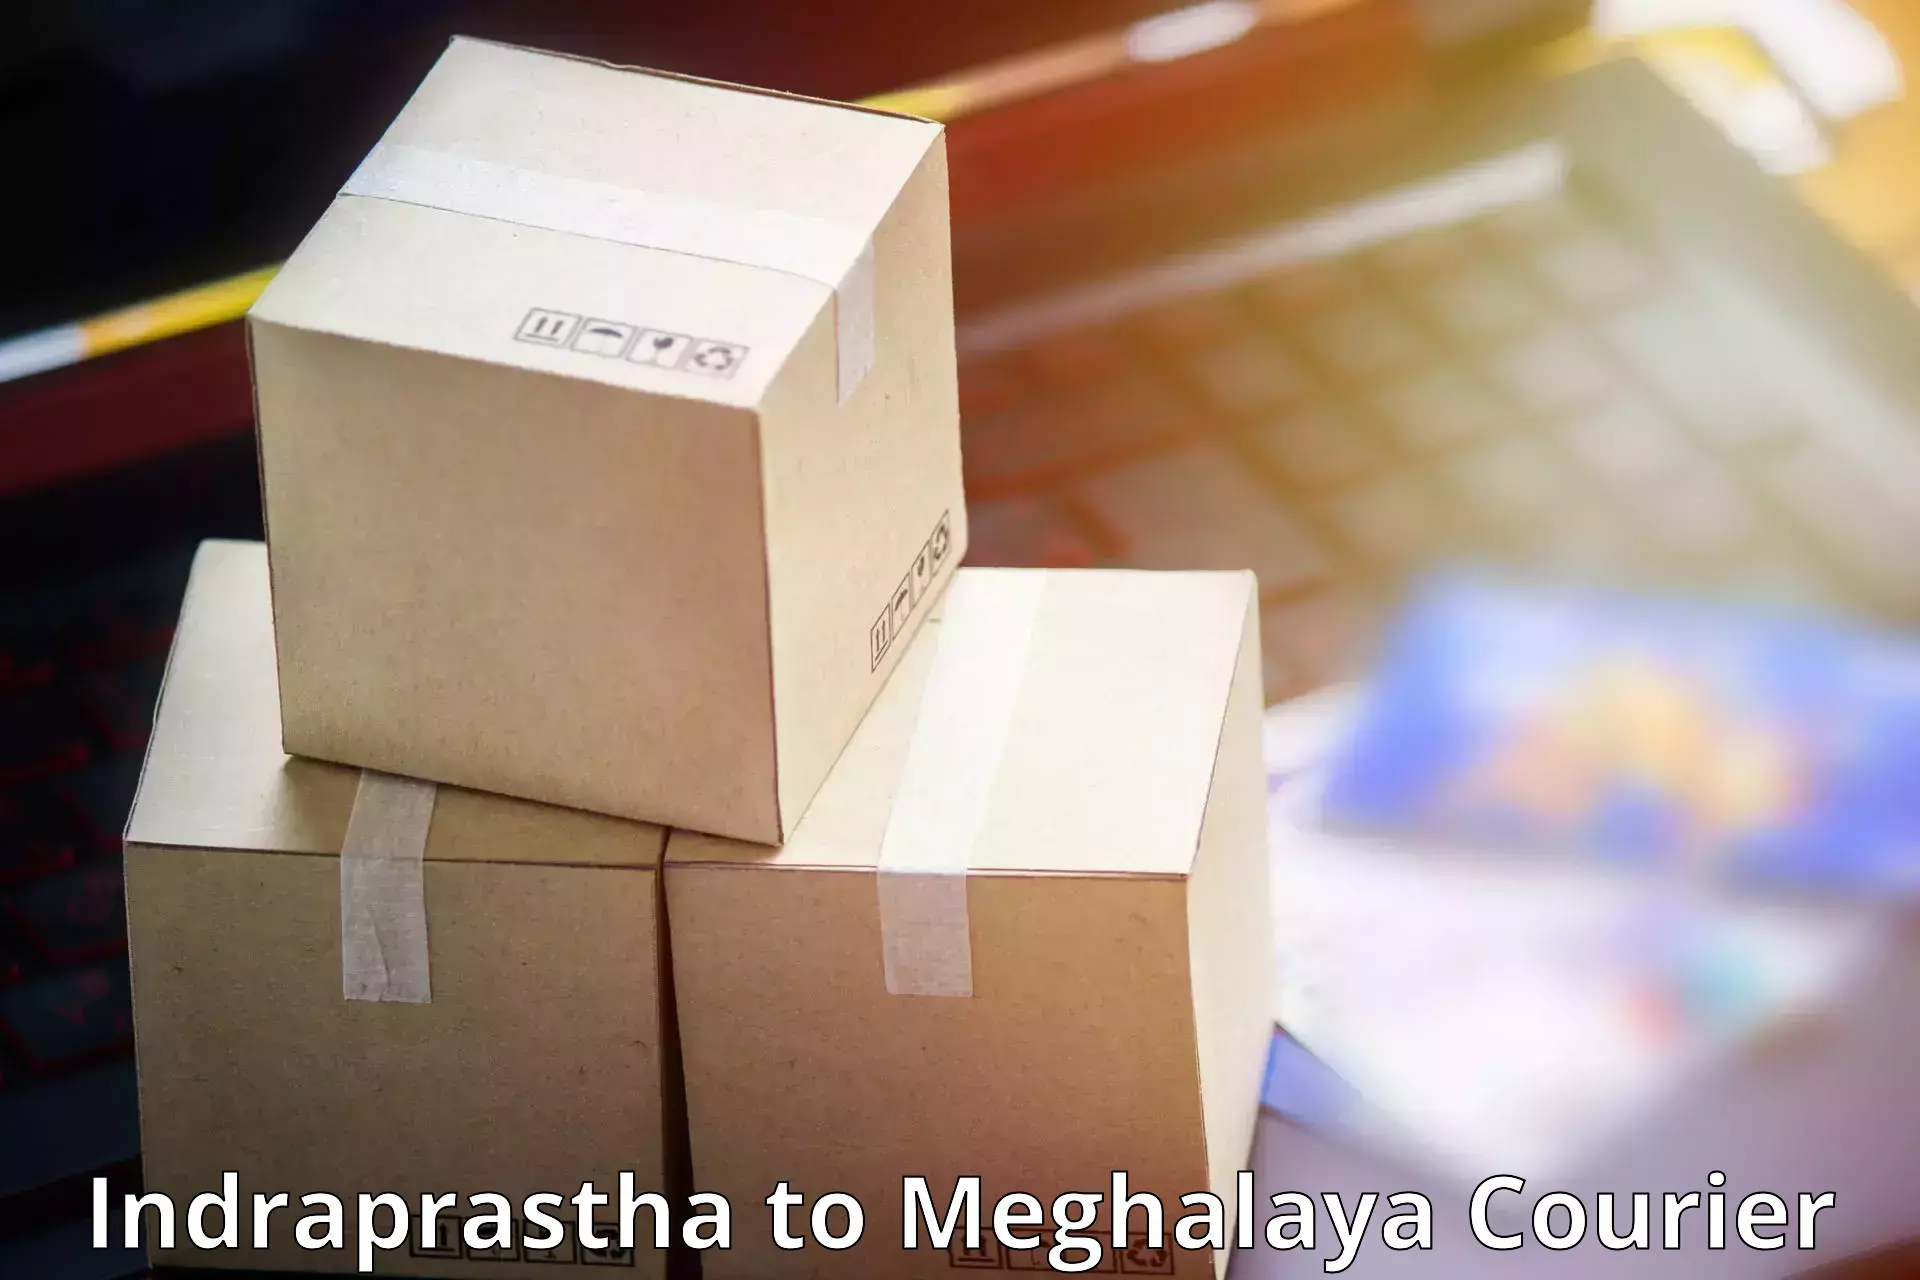 State-of-the-art courier technology Indraprastha to Tura